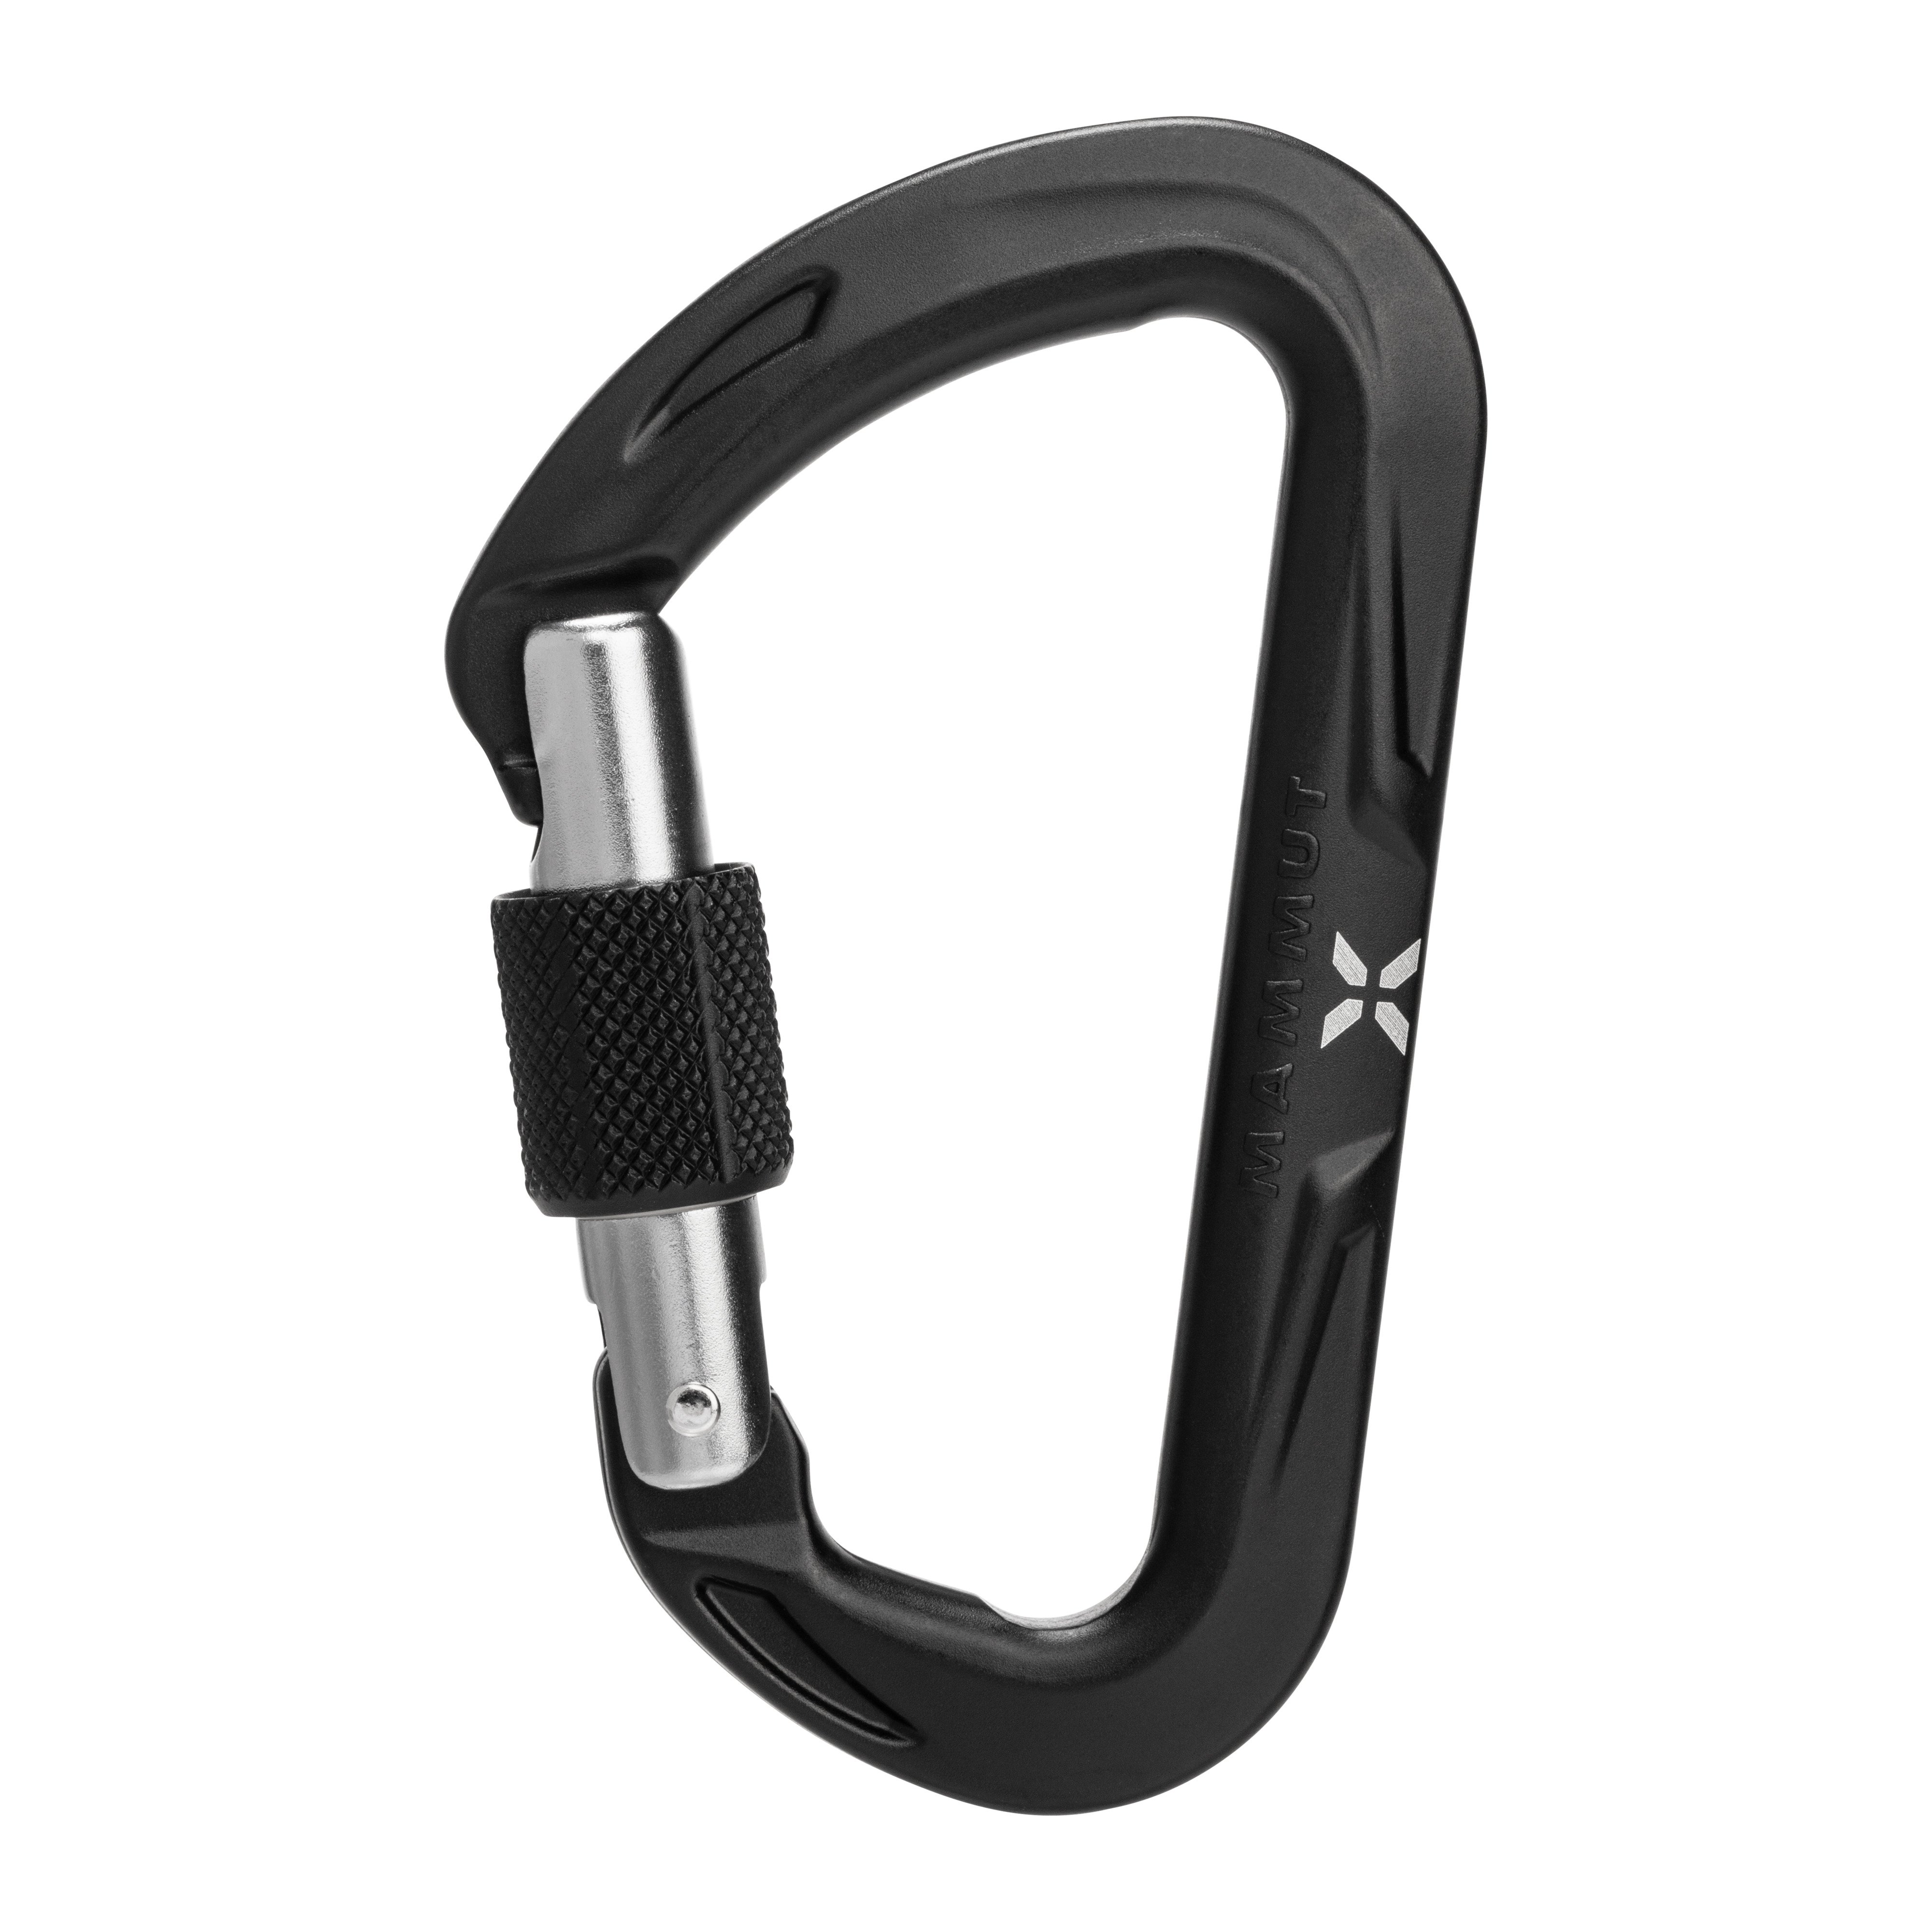 Nordwand Micro Lock Carabiner - one size product image